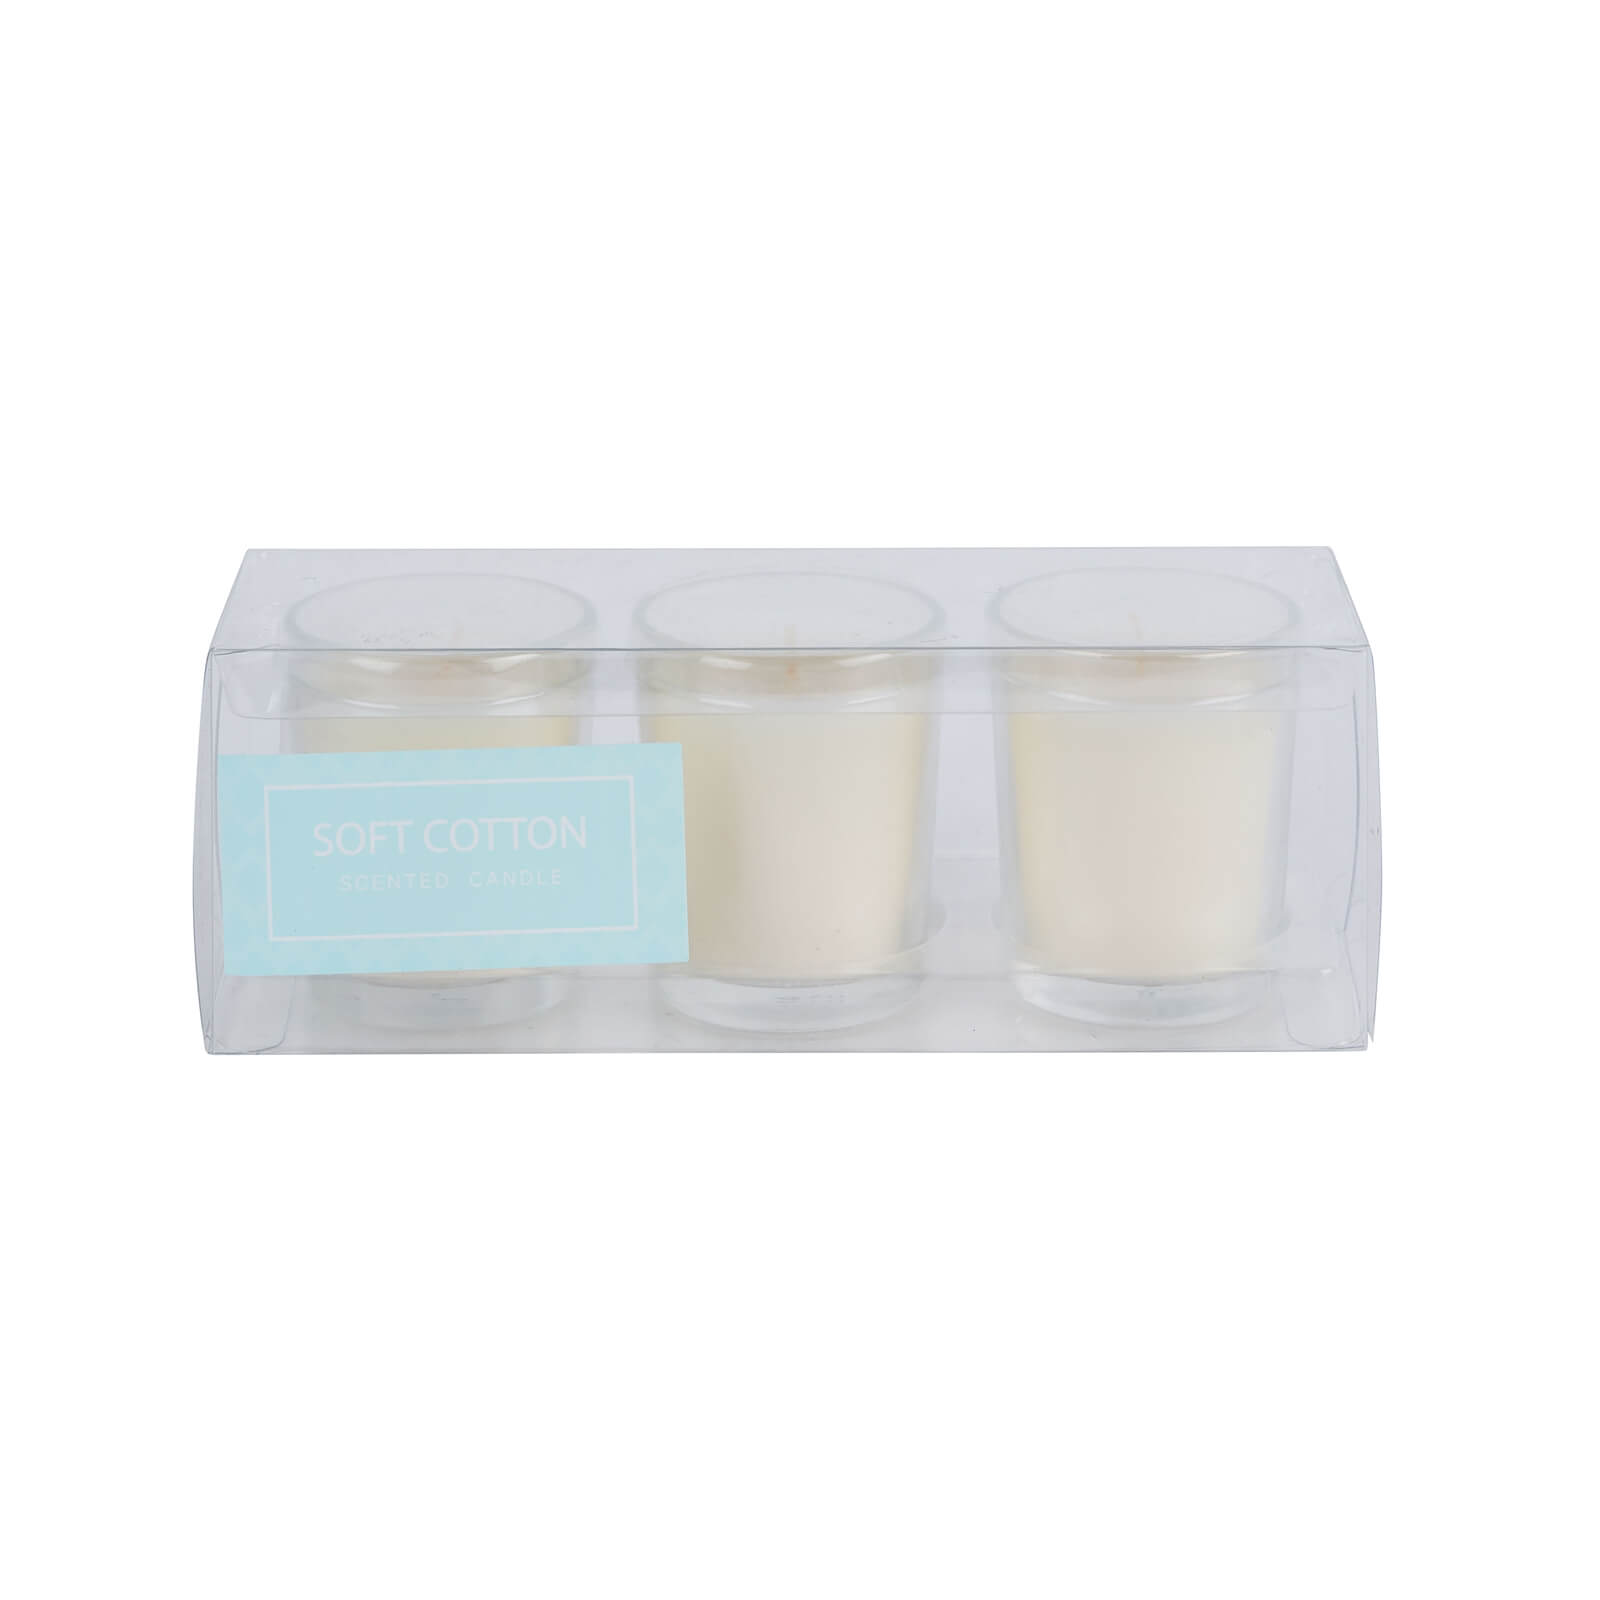 Photo of Soft Cotton Votive Candle - 3 Pack